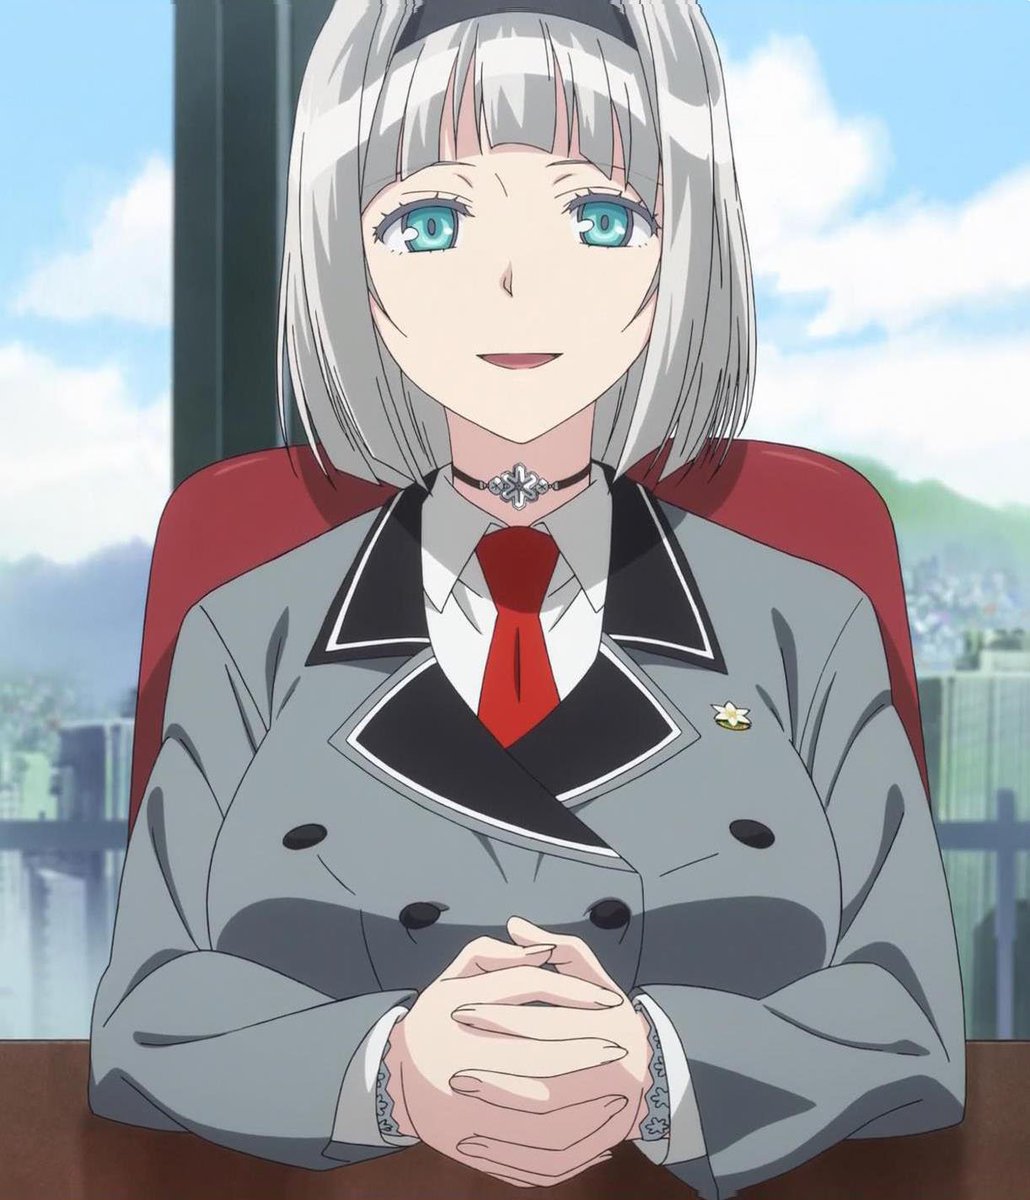 #67 Shimoneta.-Best Girl: Anna Nishikinomiya. Another of the club of crazy girls XD My god, she is such an angelic, righteous girl... Until she gets horny and becomes a beast. Top tier hahaha.This anime is so great. Really funny and with an amazing number of dirty jokes XD